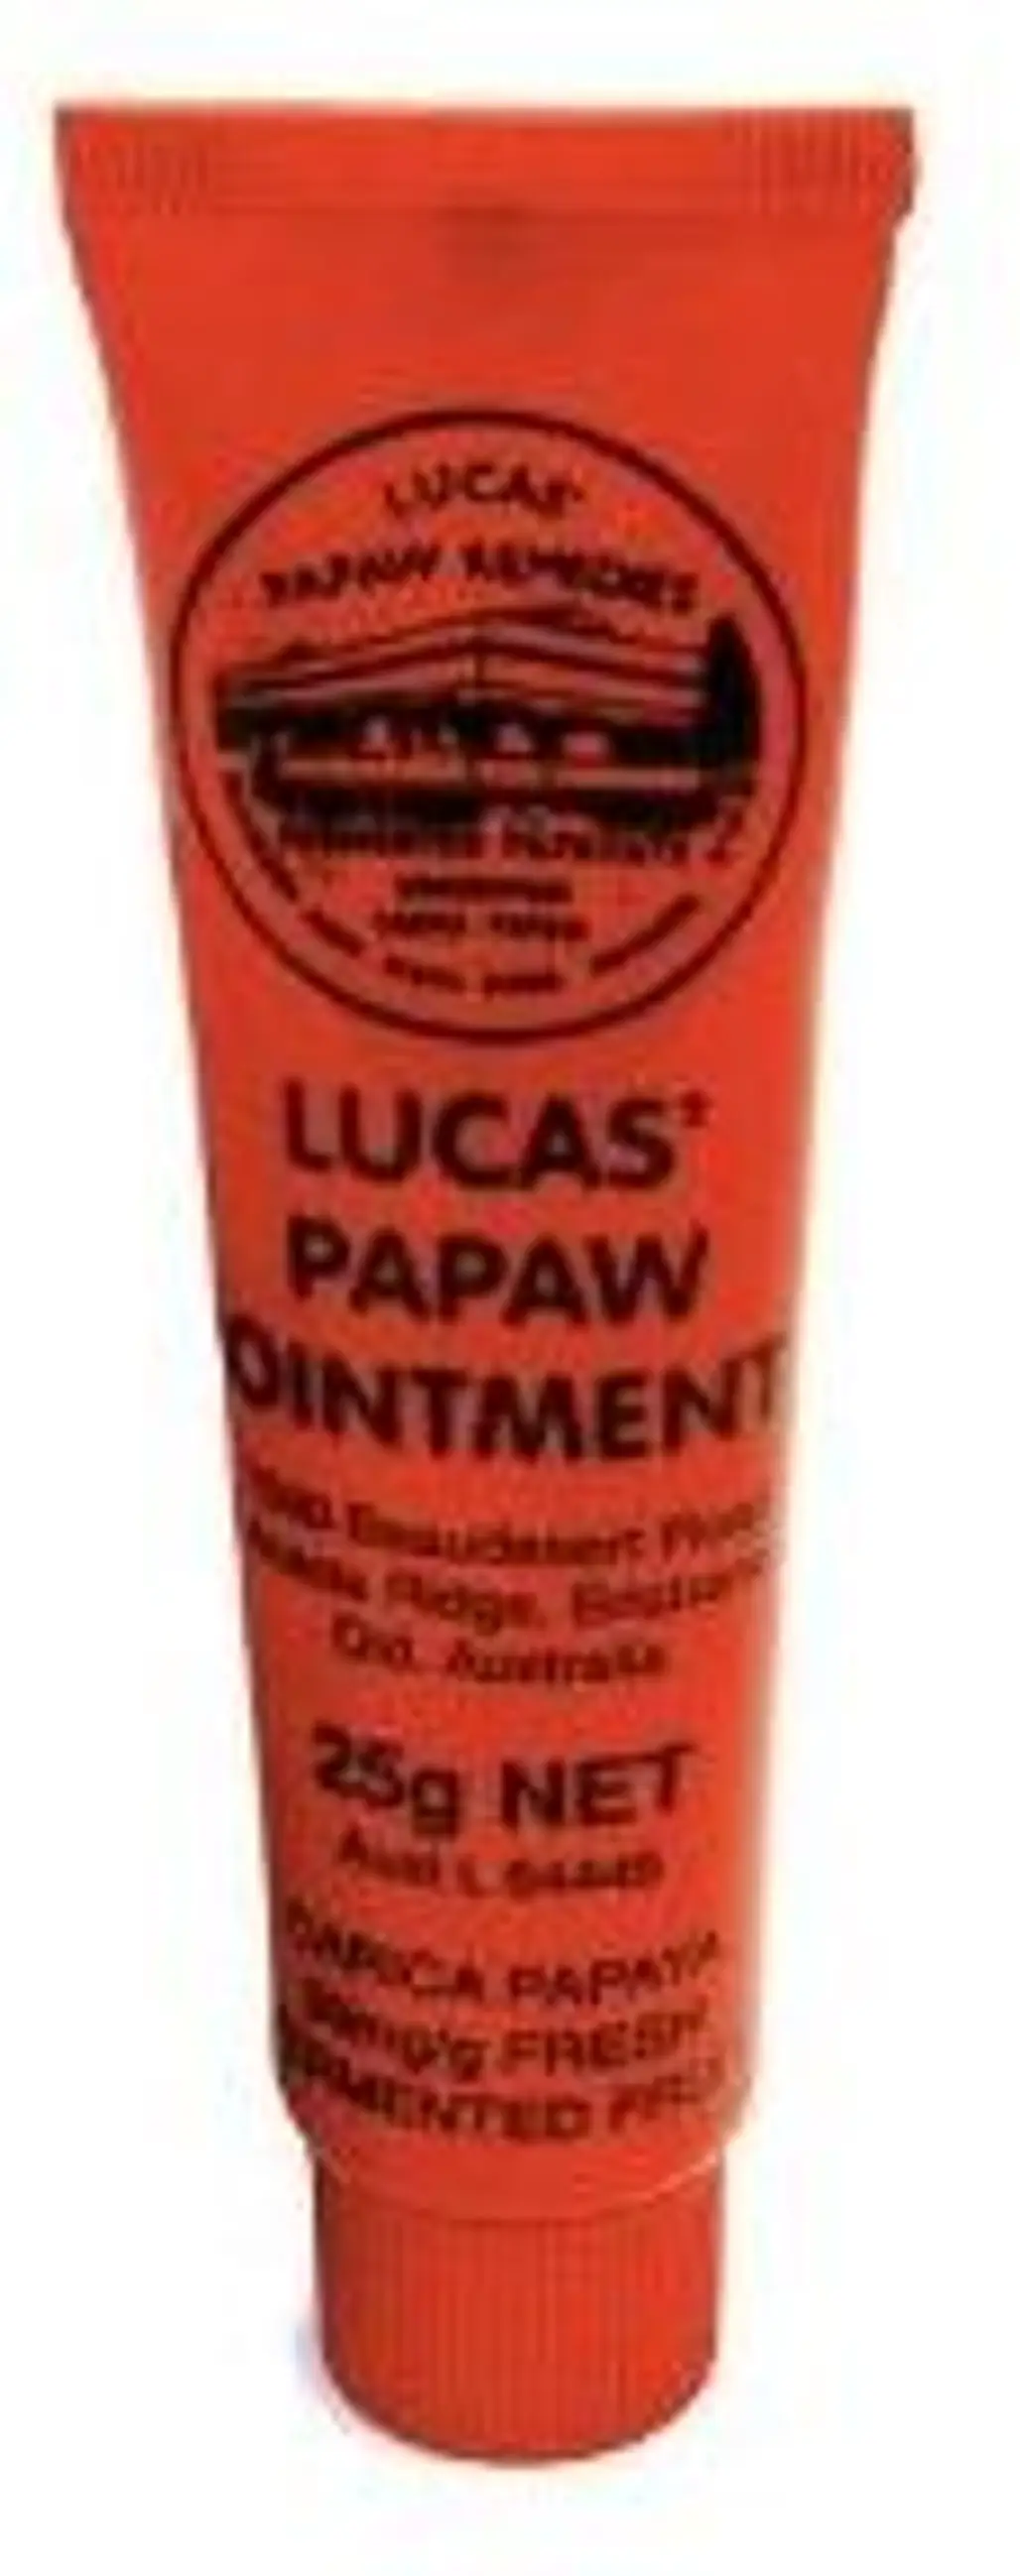 Lucas’ Paw Paw Ointment